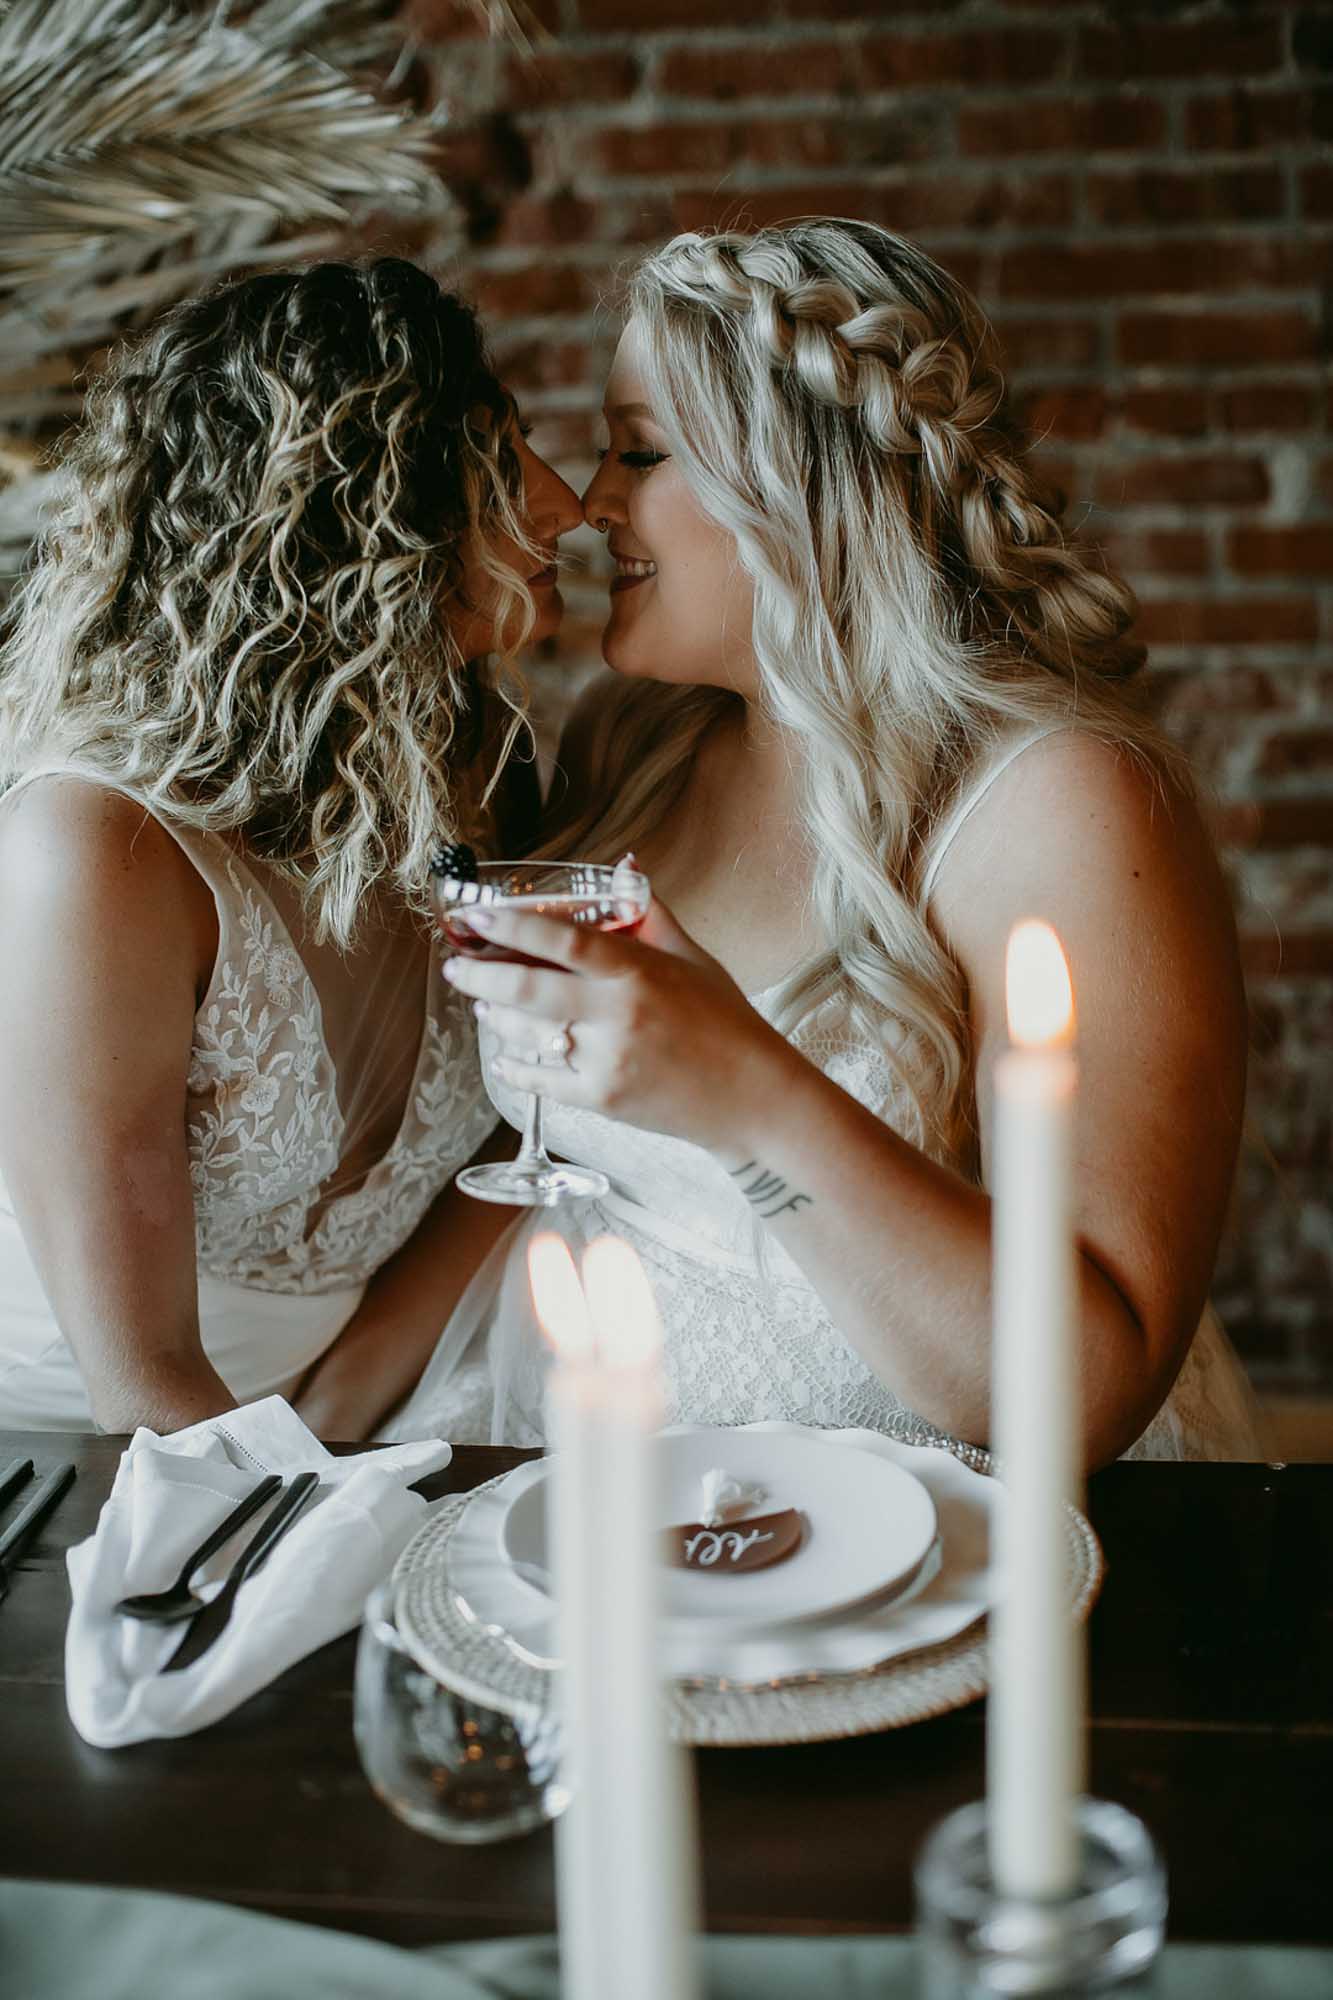 Edgy wedding ideas with some boho flair | Leah Bullard | Featured on Equally Wed, the leading LGBTQ+ wedding magazine